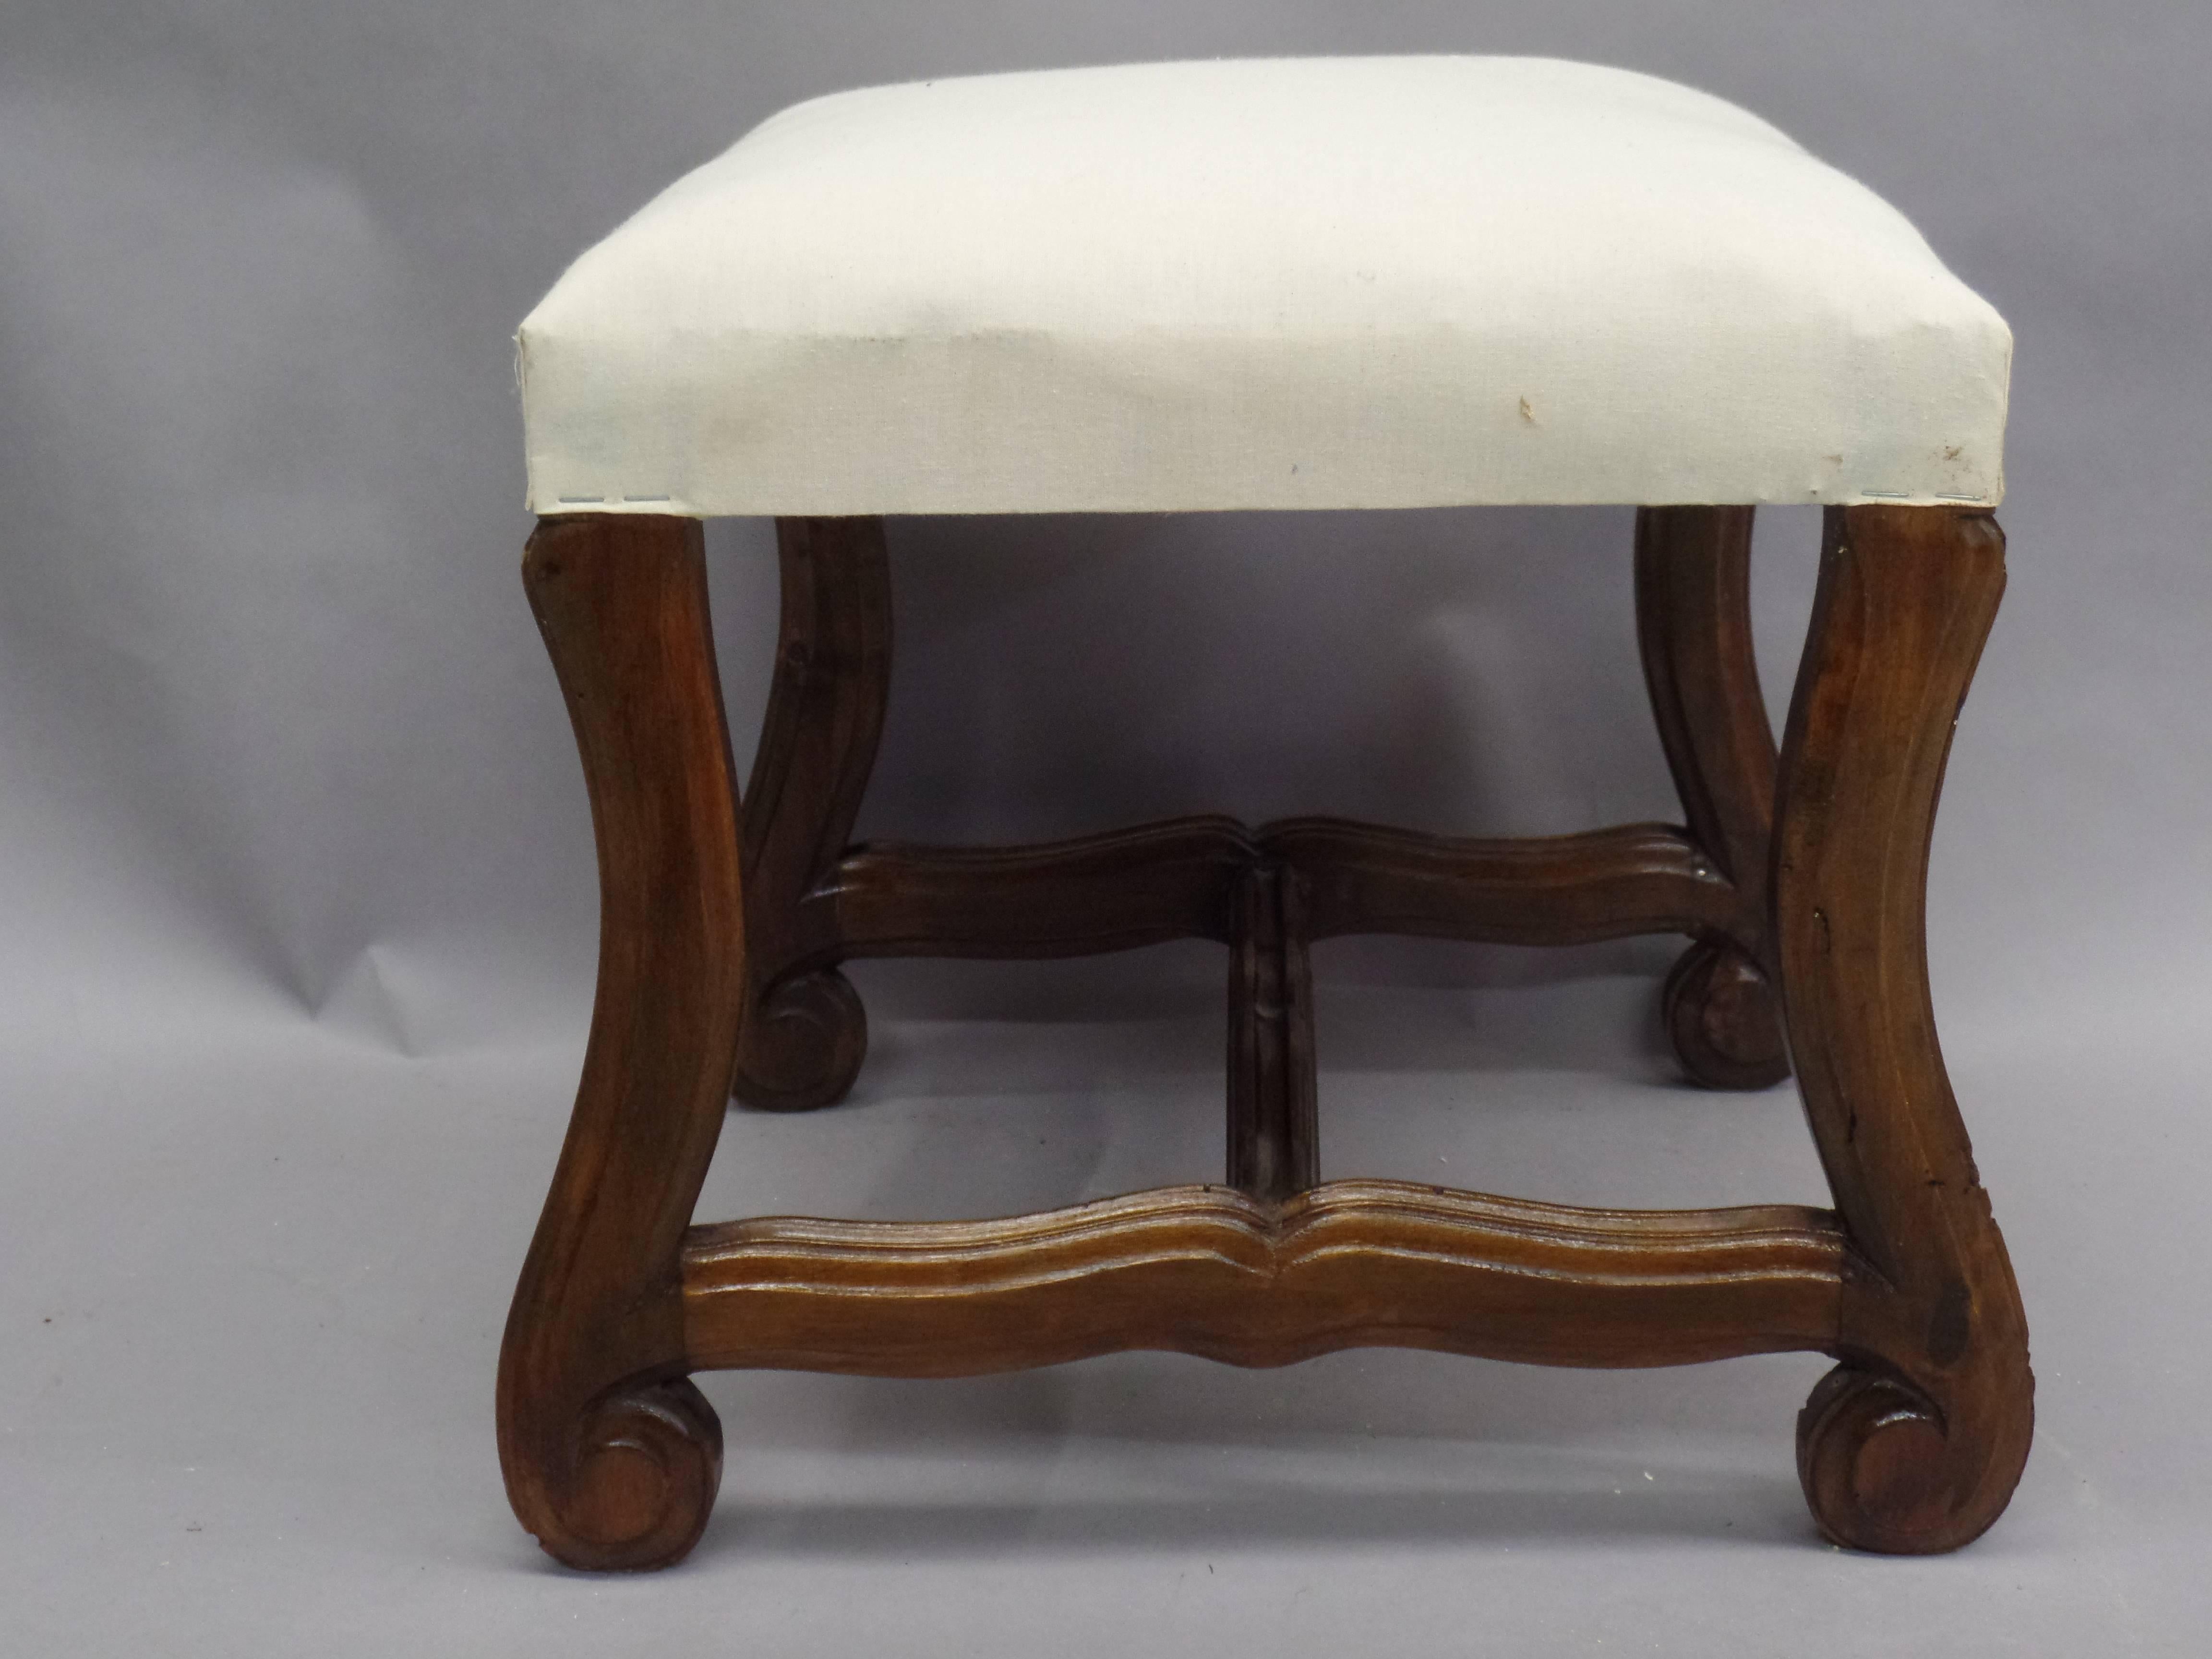 A pair of French carved stools or benches in the Style of Louis XIV, Each in walnut and delicately carved and channeled into a perfect harmony of soft curves.